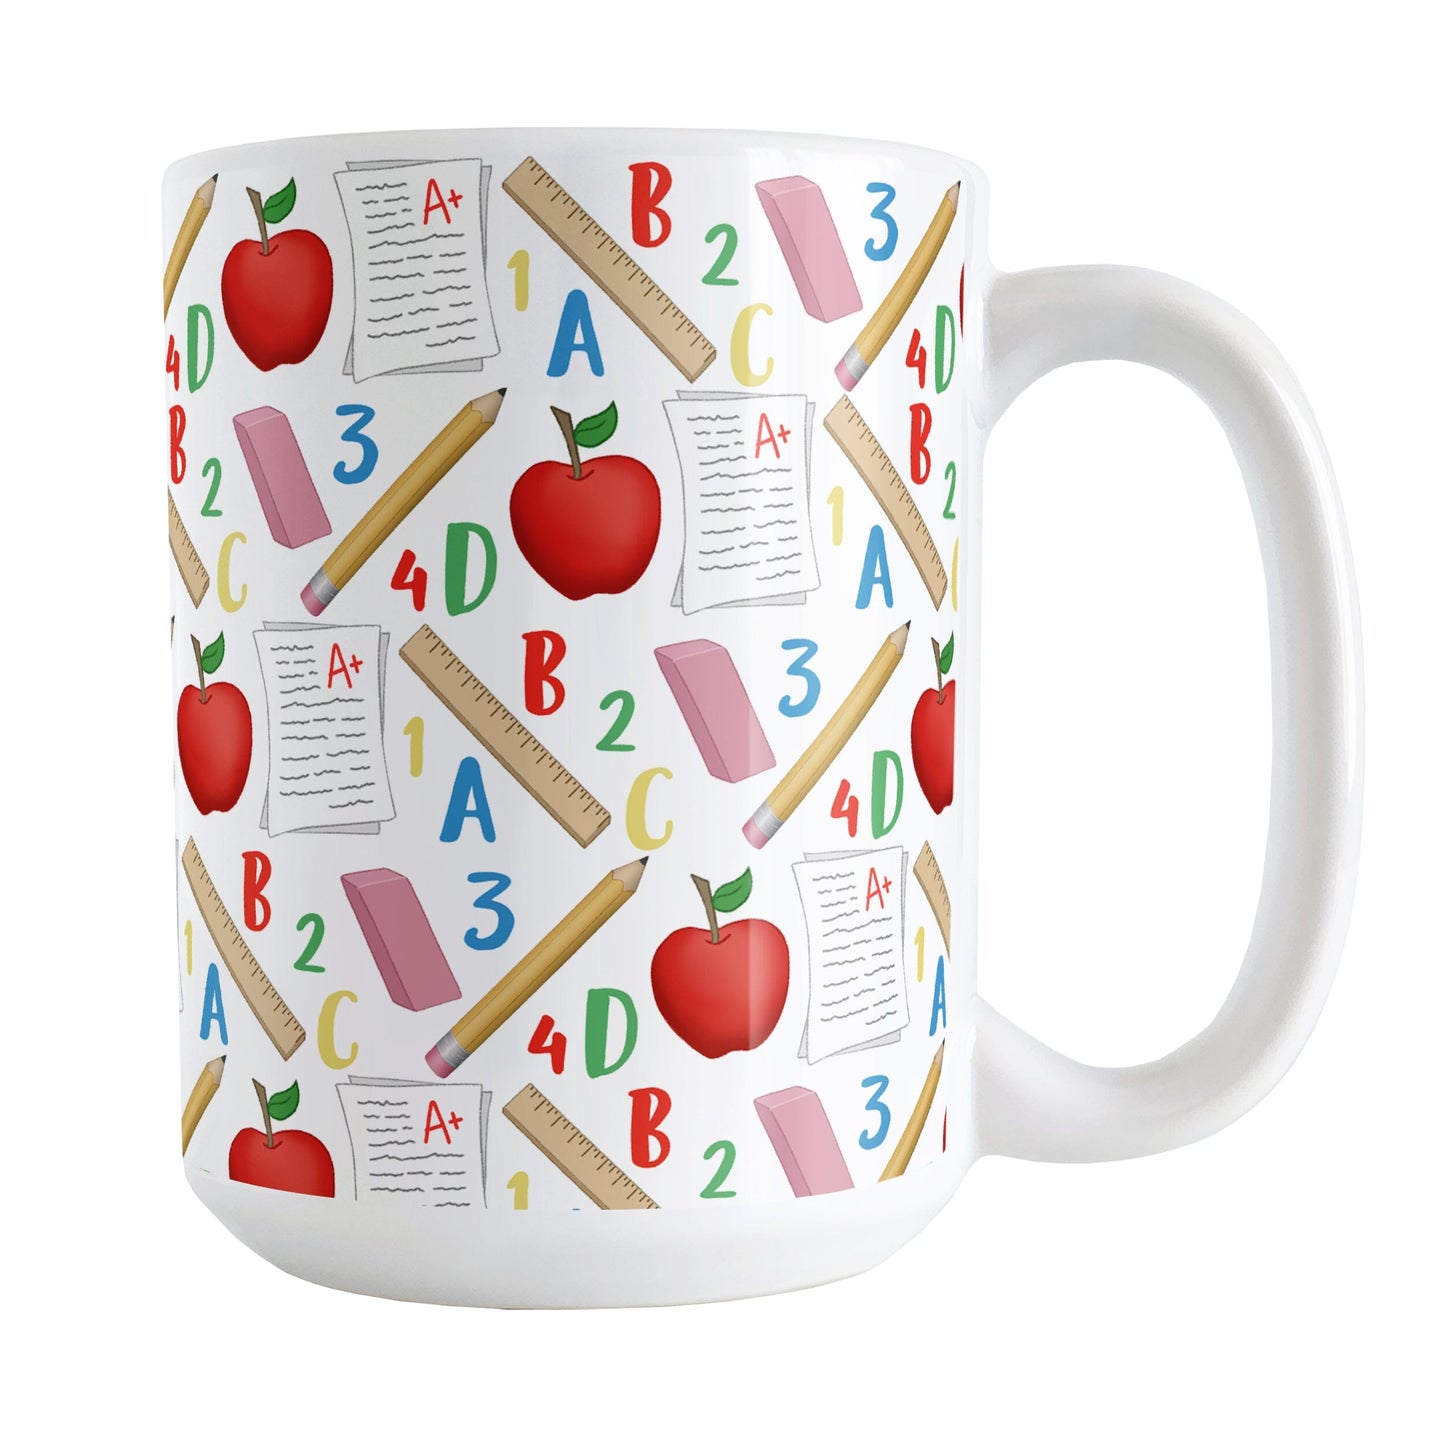 School Pattern Mug (15oz) at Amy's Coffee Mugs. A ceramic coffee mug designed with a school-themed pattern with apples, rulers, erasers, graded papers, numbers, and letters that wraps around the mug to the handle. 